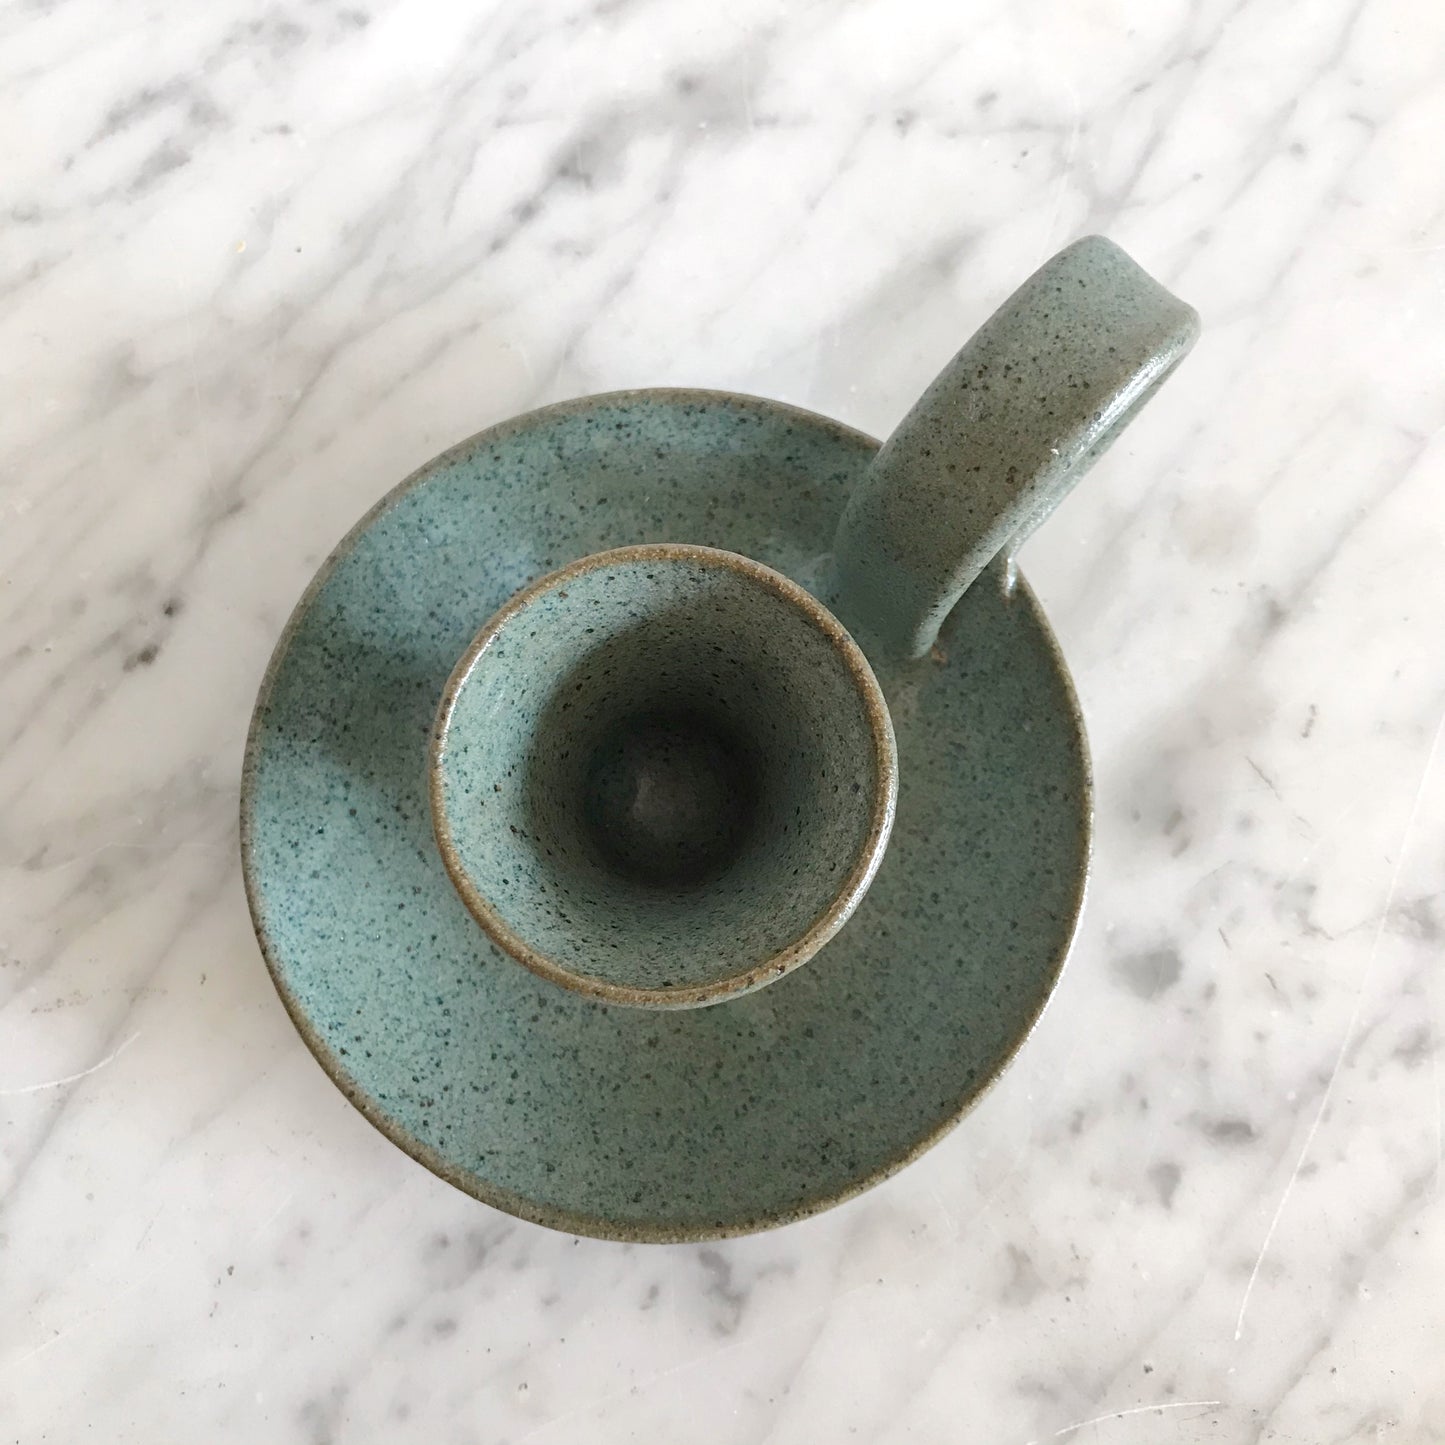 Green Stoneware Candle Holder, Afton Pottery